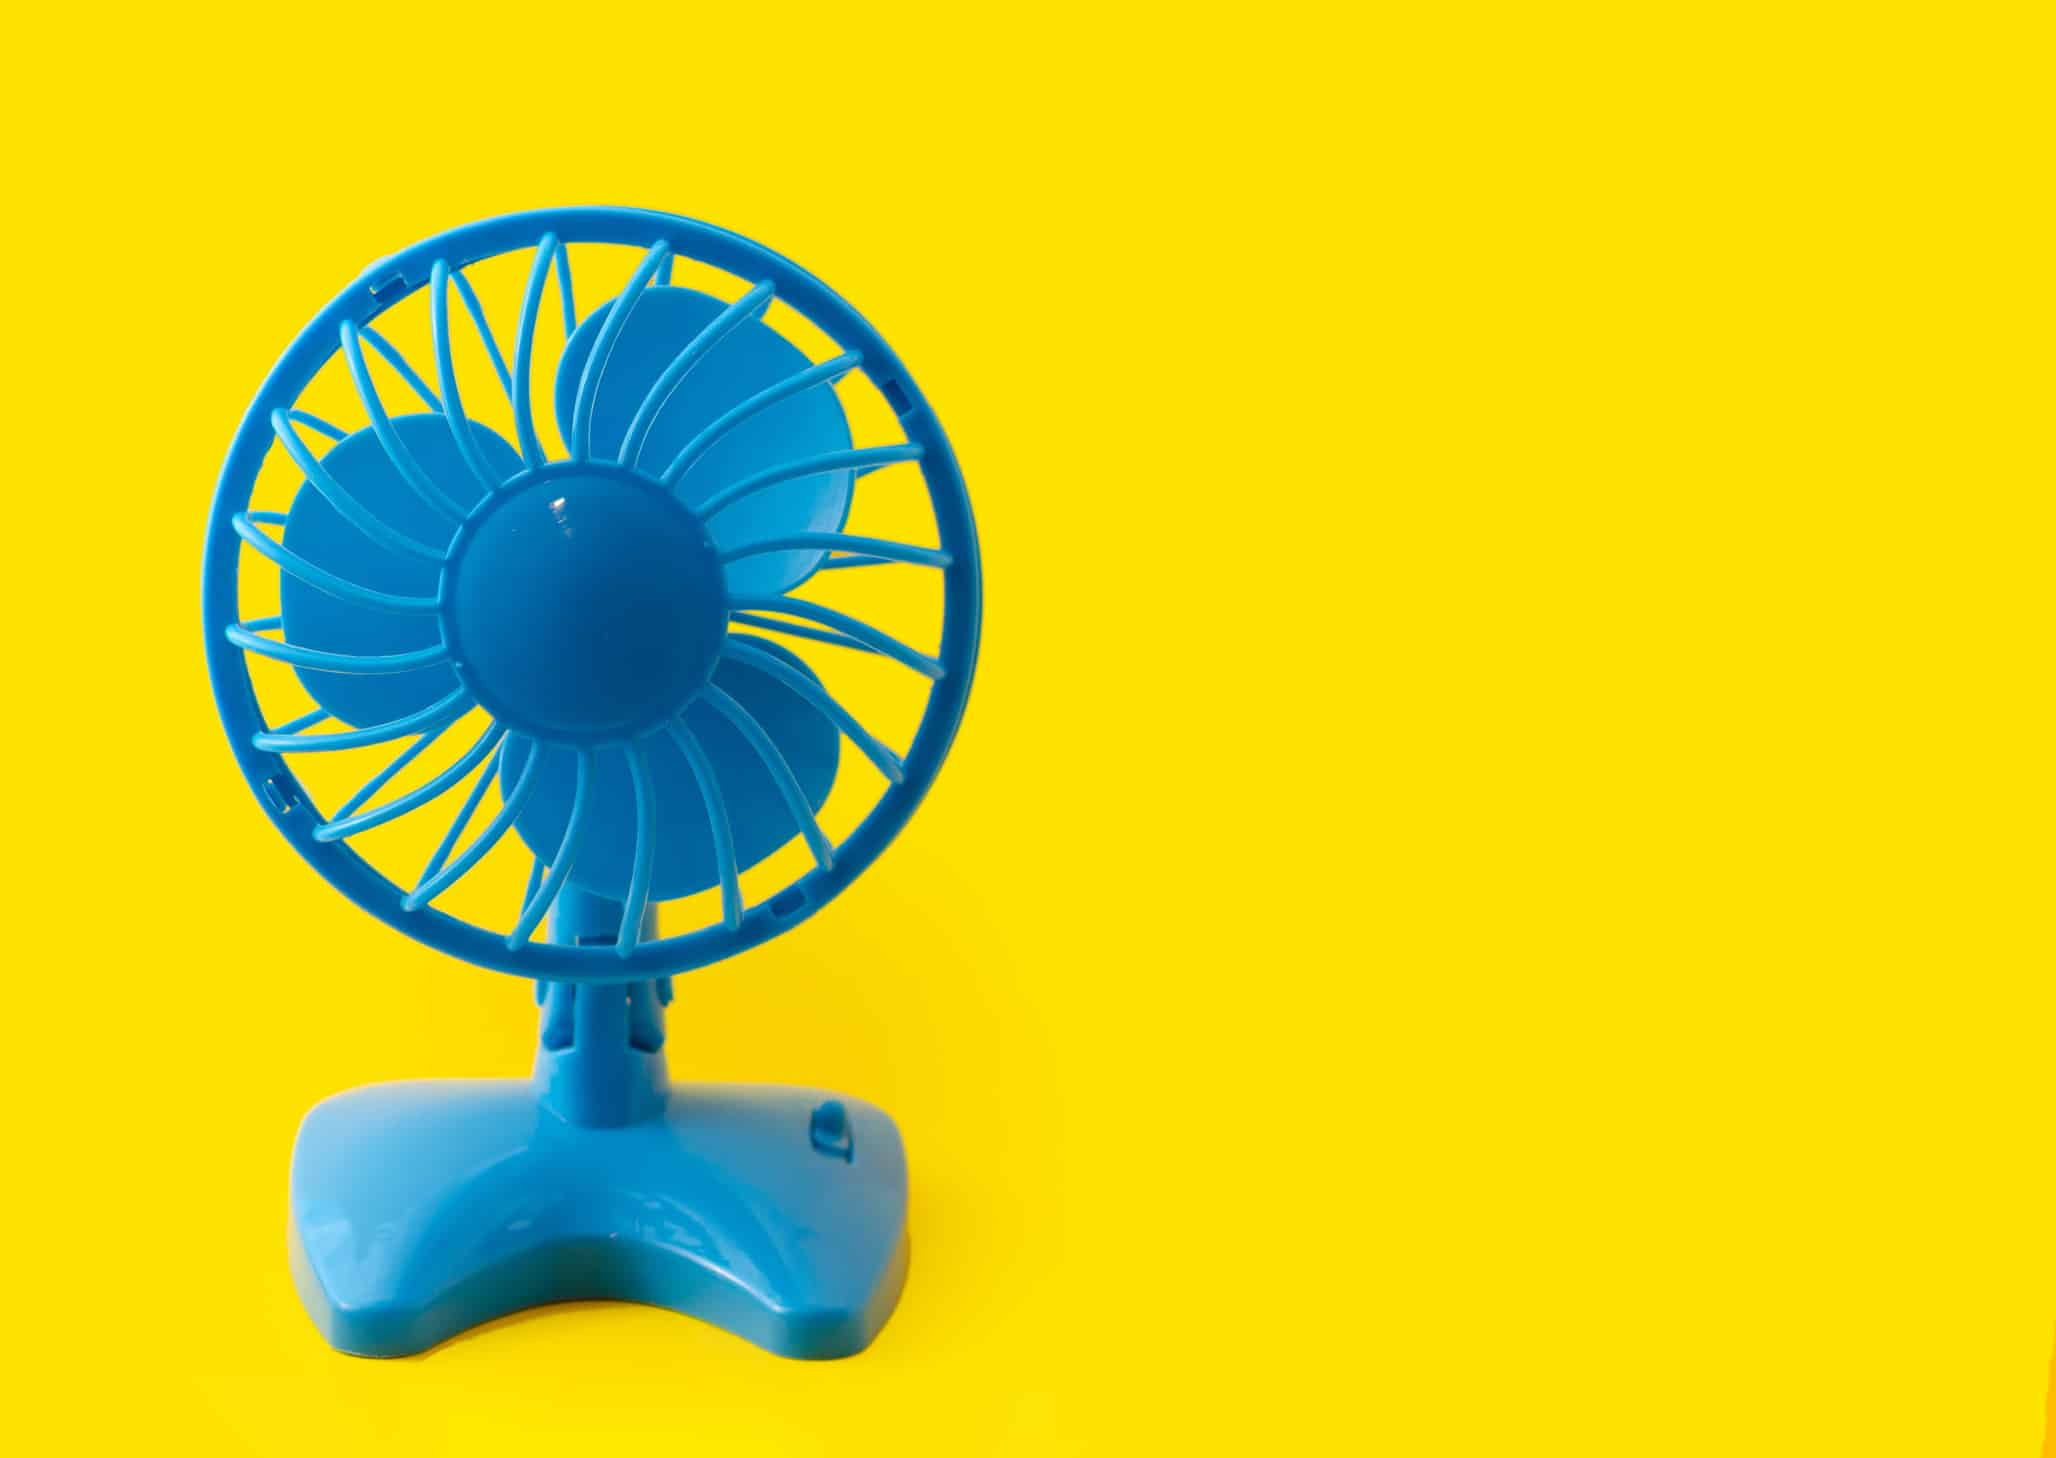 electric blue plastic fan isolated on yellow background